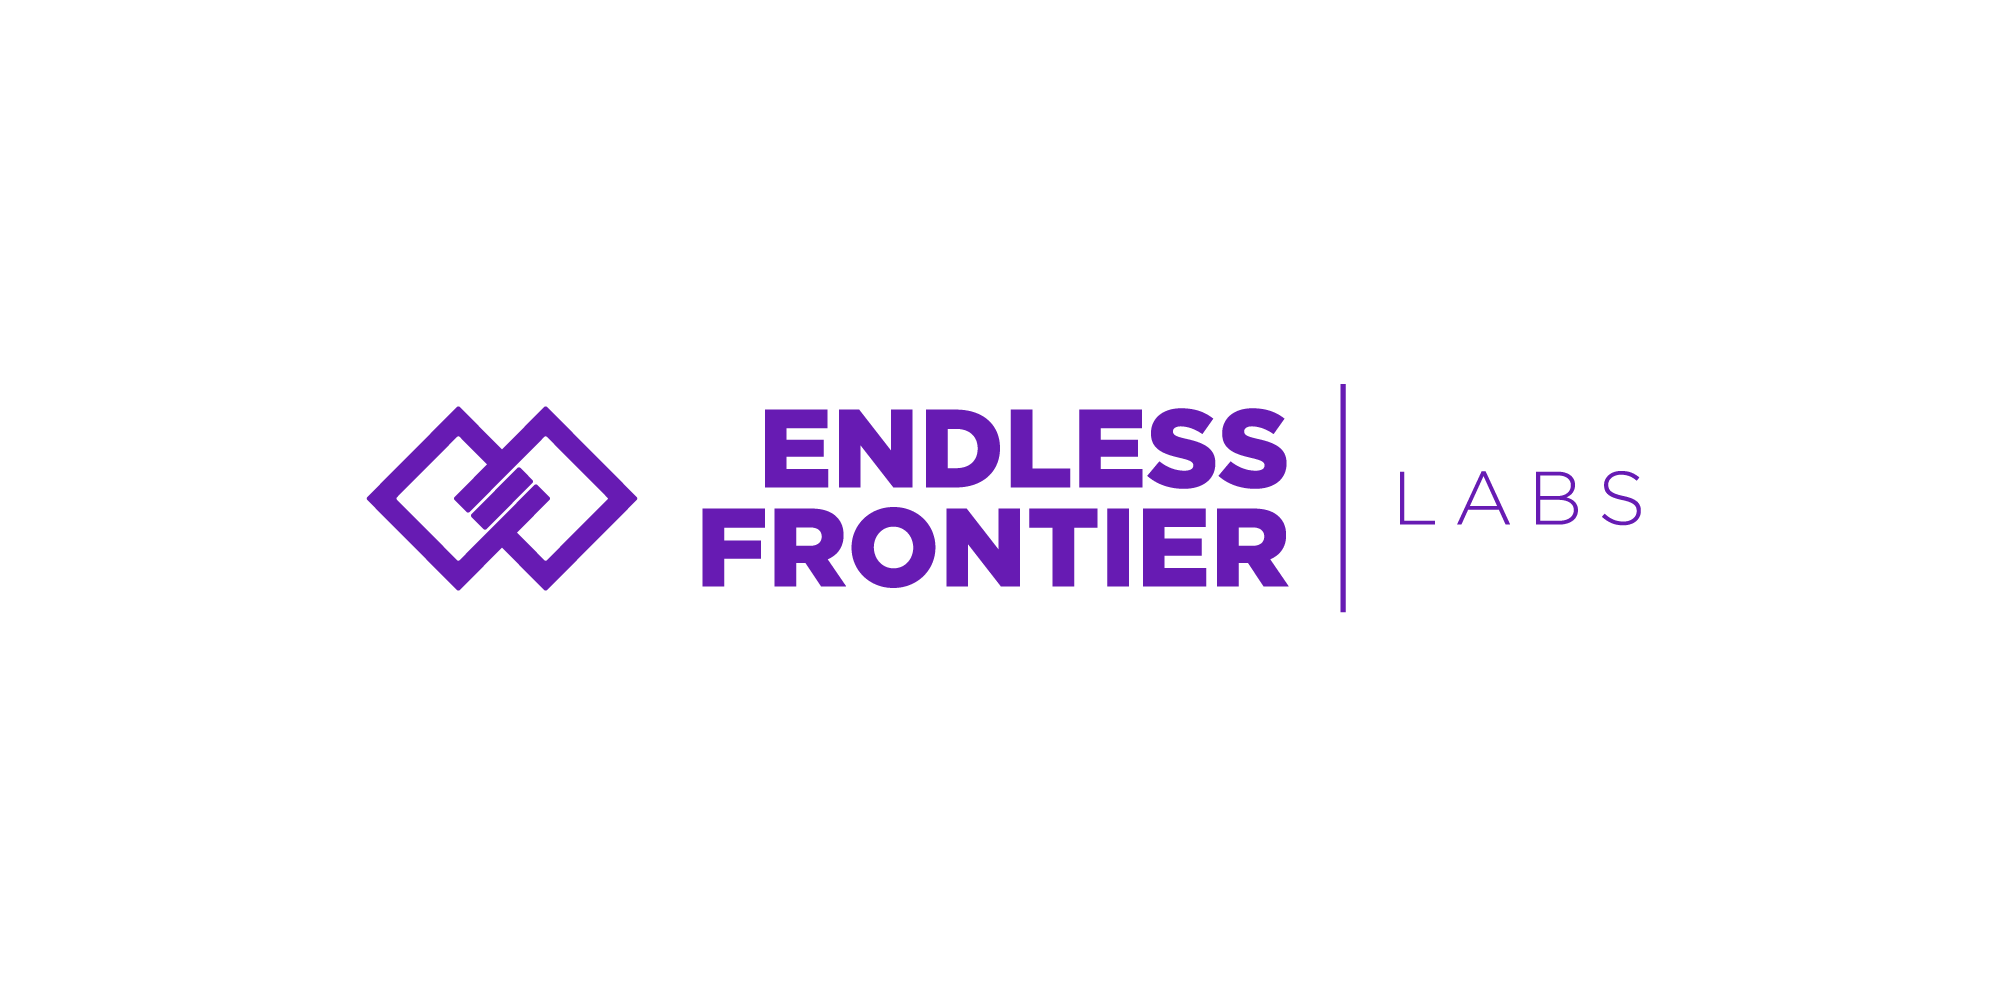 Endless Frontier Labs logo